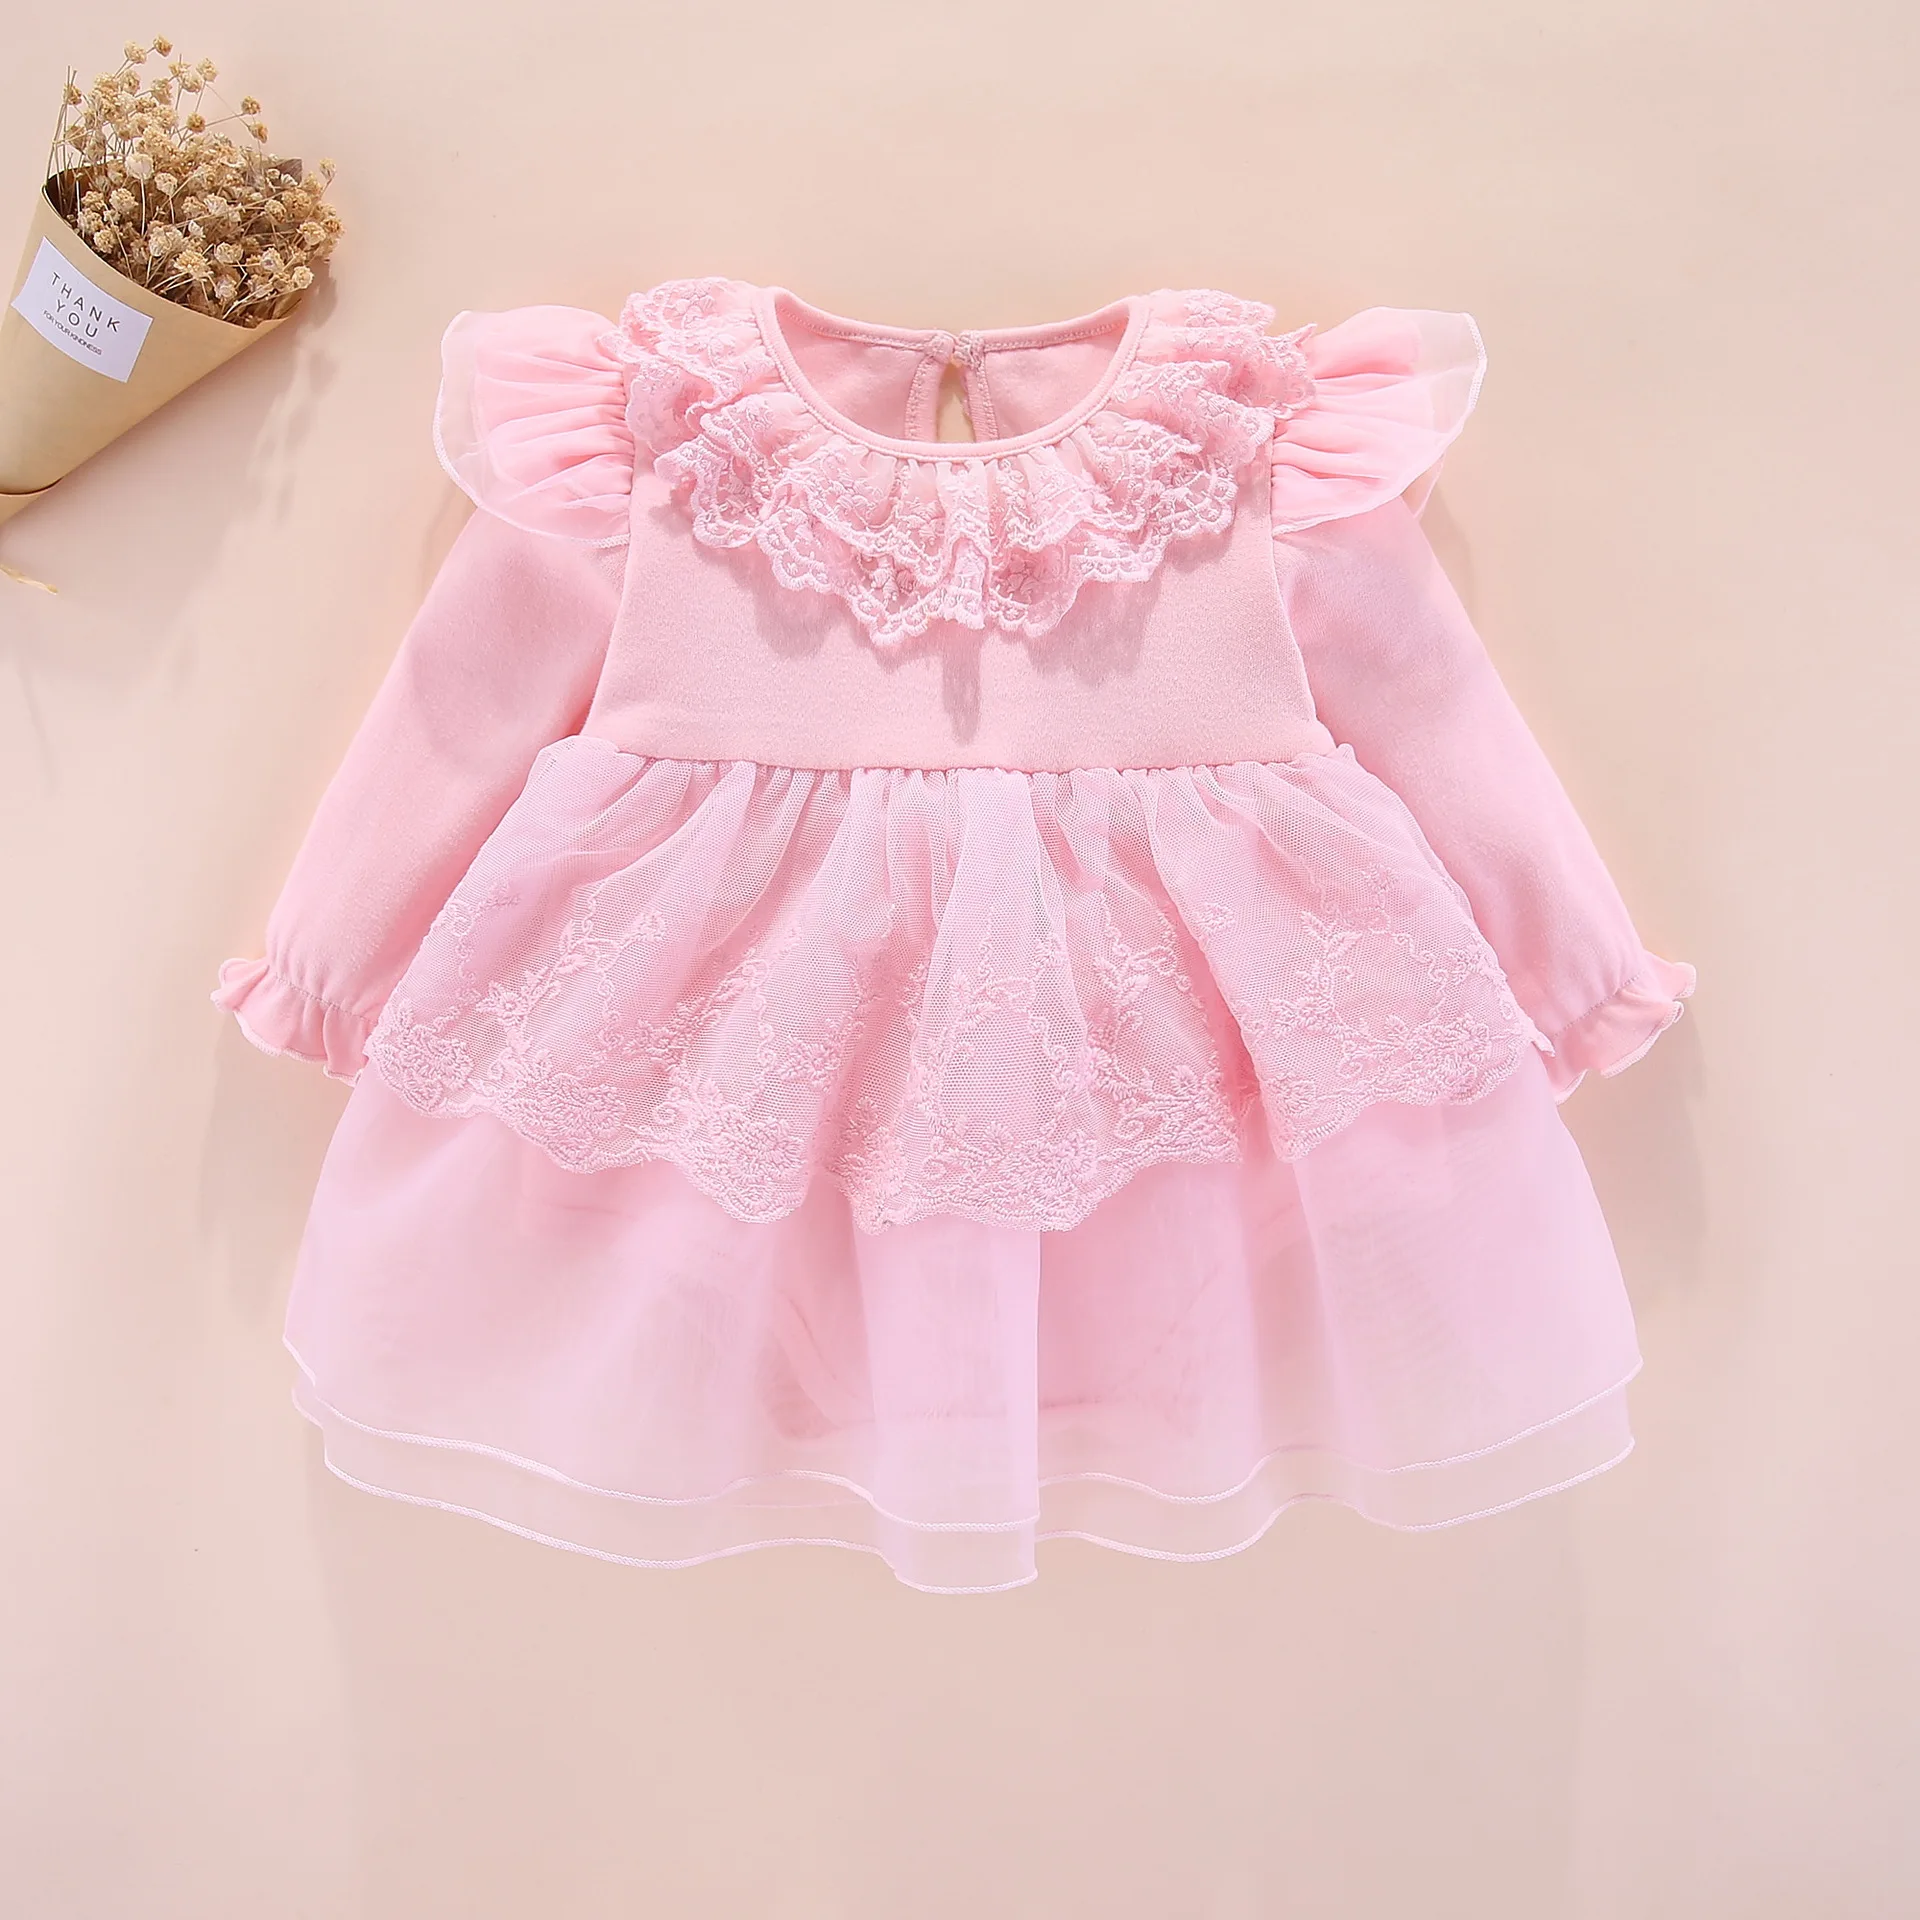 

new born baby girls infant dress clothes lace cotton girl party dress christening gown long sleeve baby girl dresses 3 6 months